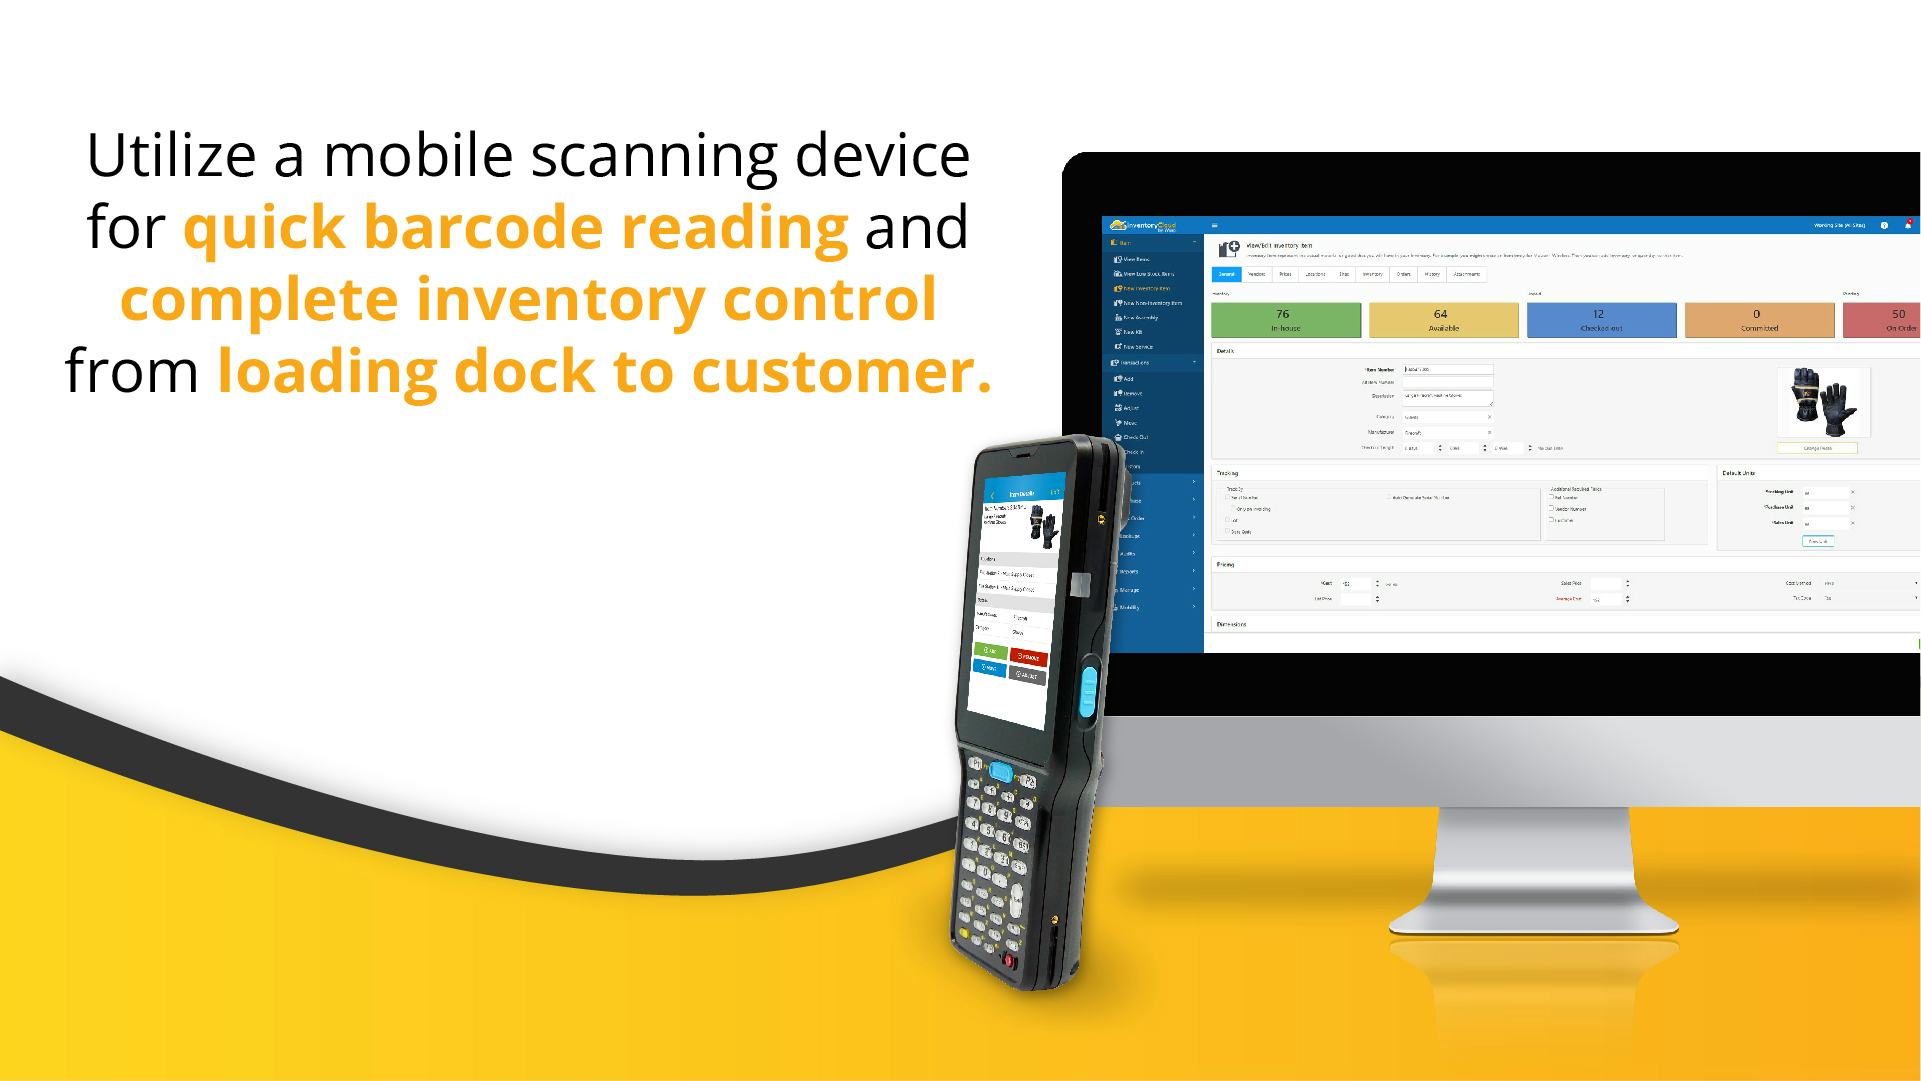 InventoryCloud Software - Utilize a mobile scanning device for quick barcode reading and complete inventory control from loading dock to customer